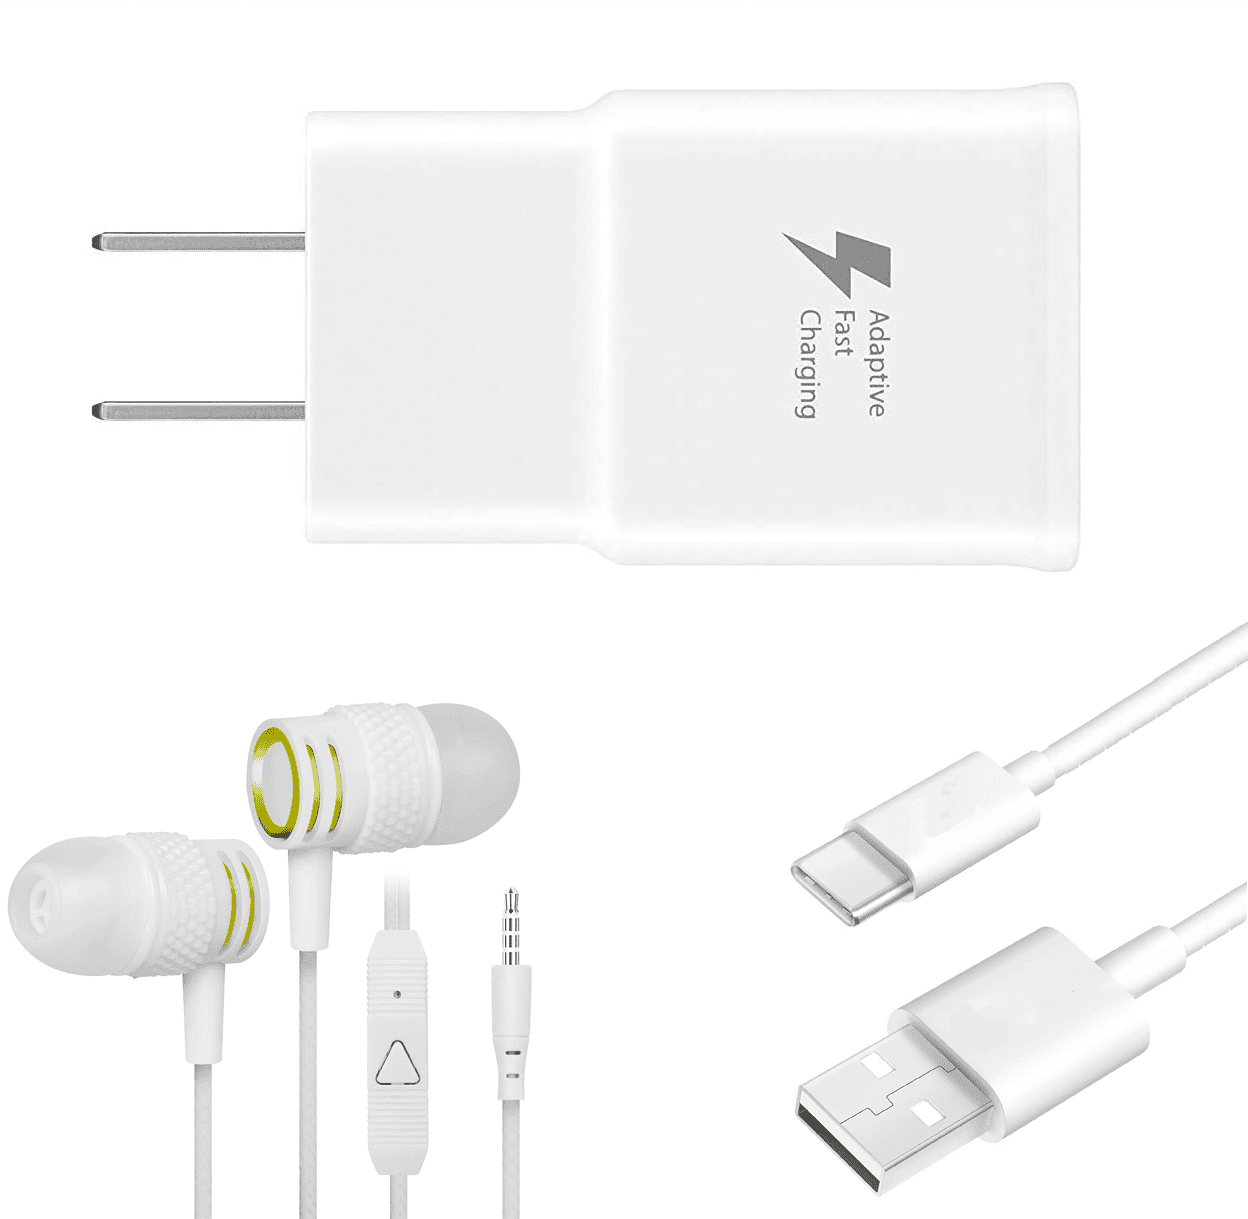 PRO USB-C Charging Transfer Cable for Asus ZenPad 3S 10! White / 3.3Ft 